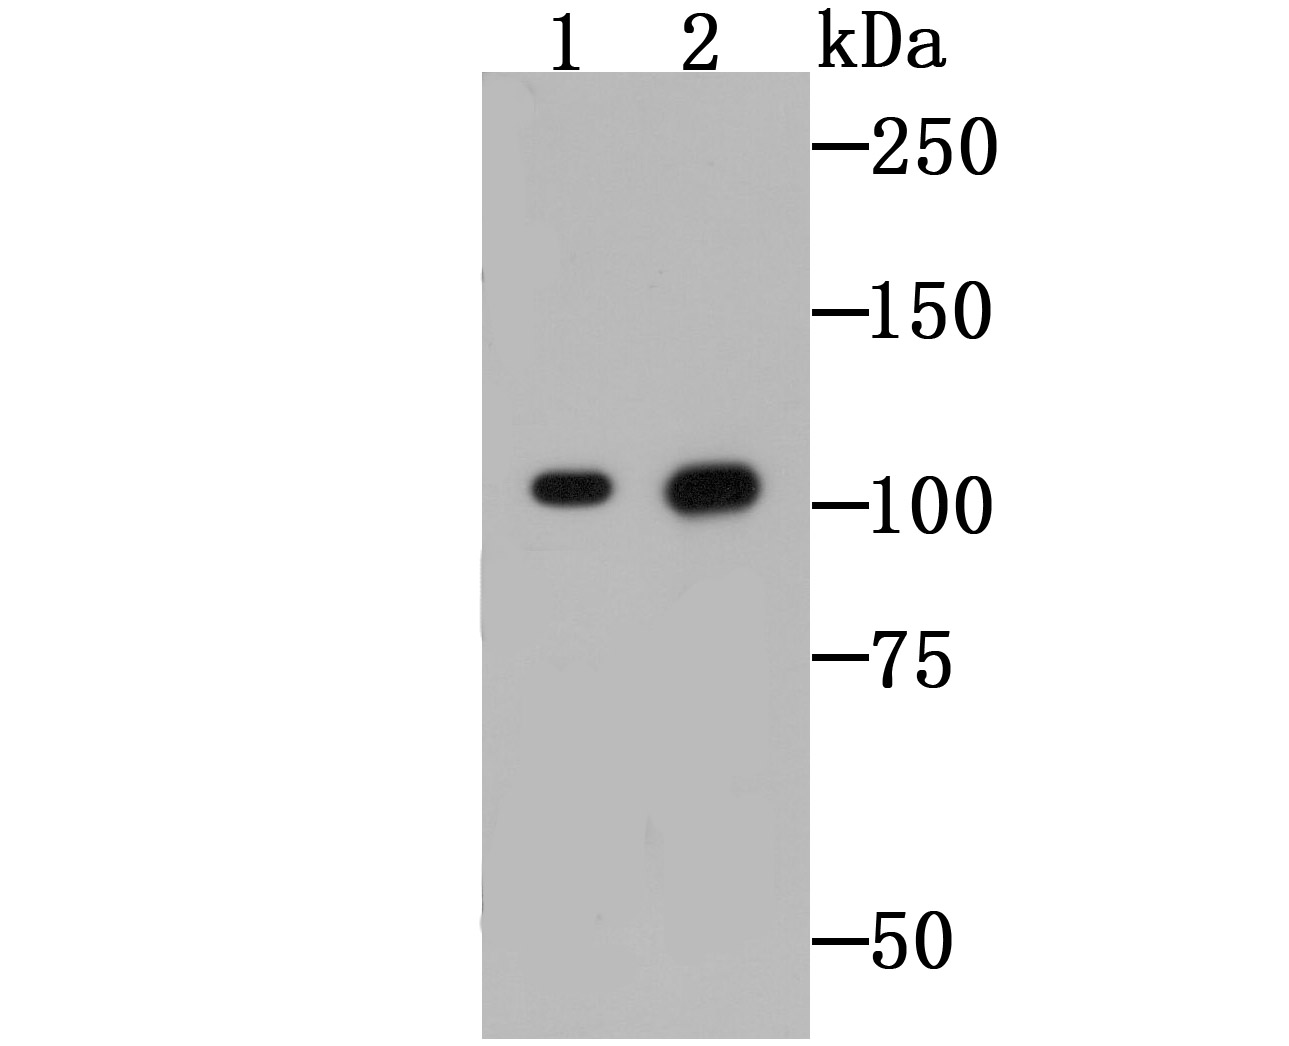 Western blot analysis of CD130 on Raji cell (1) and mouse lung tissue (2) lysates using anti-CD130 antibody at 1/500 dilution.